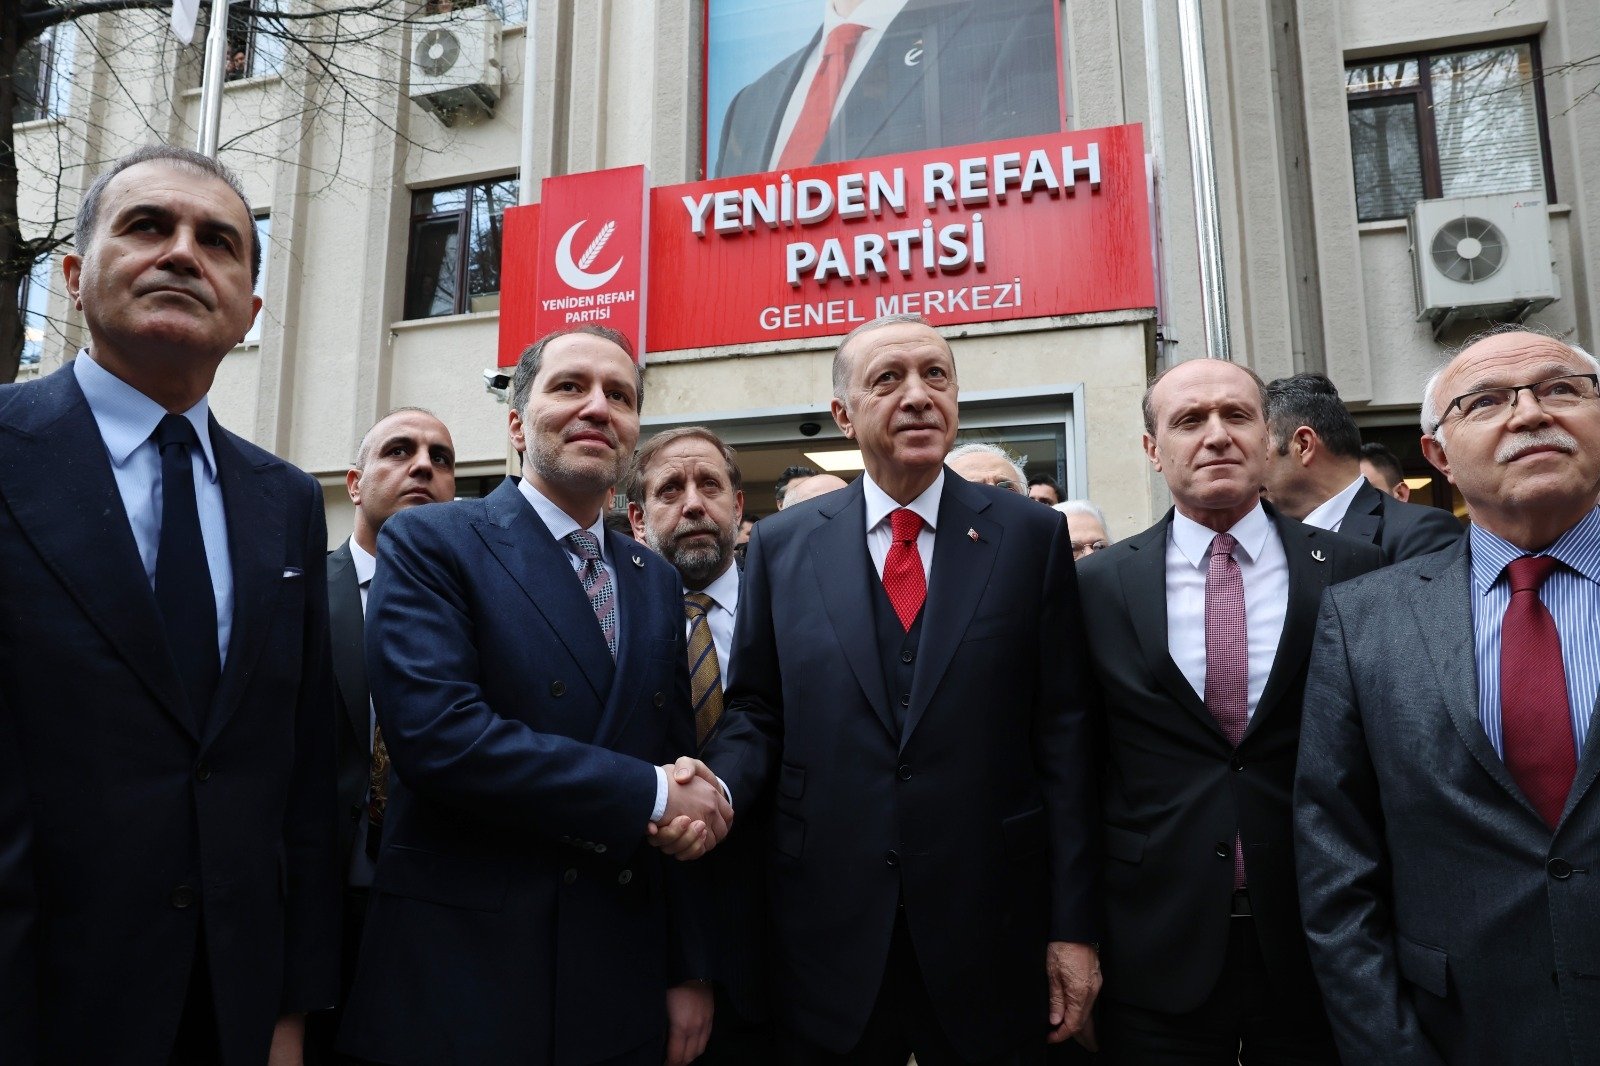 President Recep Tayyip Erdoğan (C-R) is welcomed by the leader of the New Welfare Party (Yeniden Refah Partisi) Fatih Erbakan (C-L) during his visit in Ankara, Türkiye, March 28, 2023. (DHA Photo)